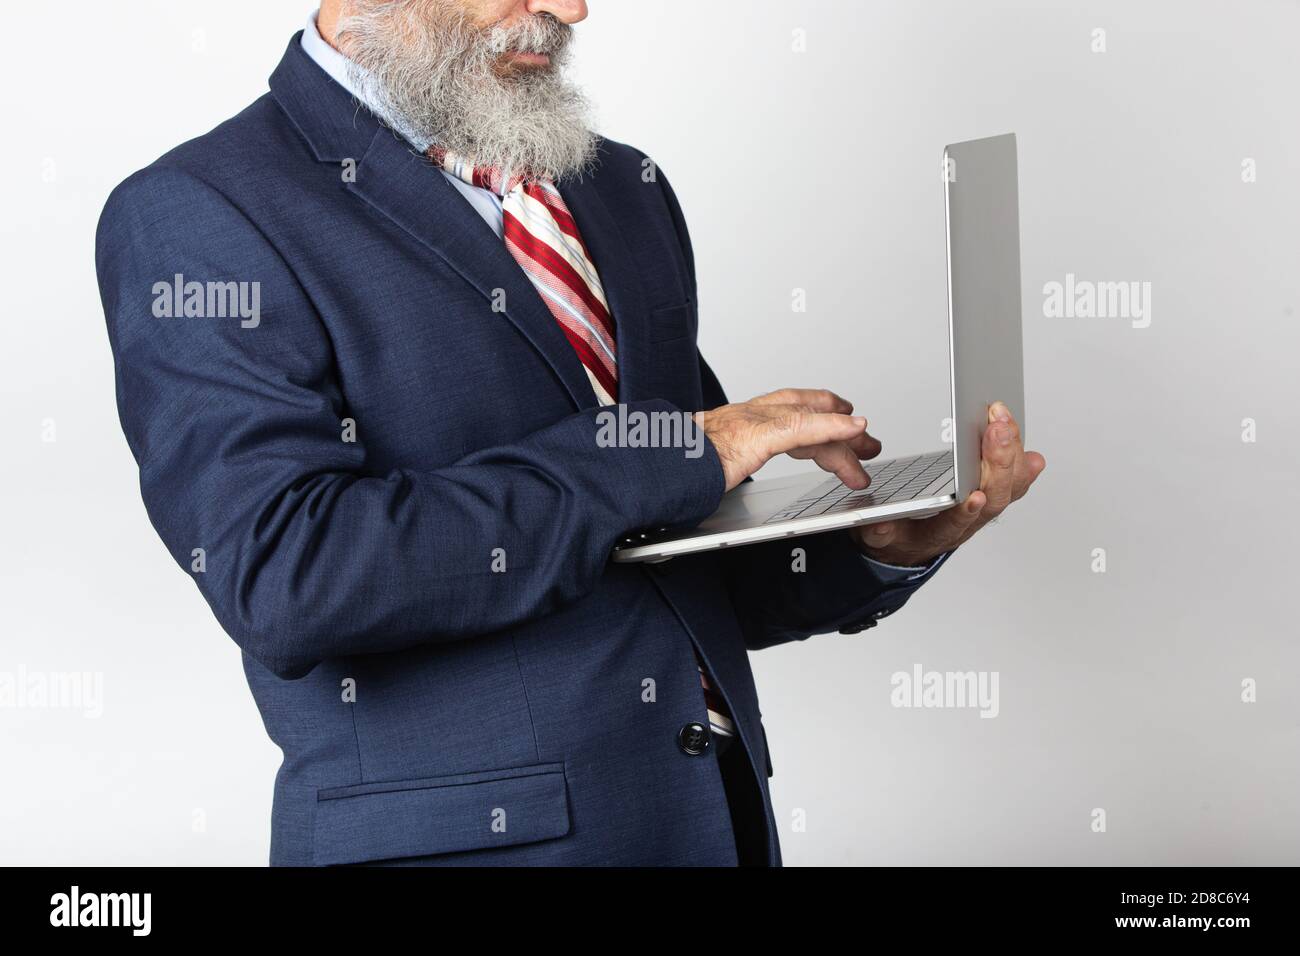 Portrait of a 60-65 year old man with a suit and a beard surfing the internet on a laptop. Lifestyle concept, technology. Isolated on white background Stock Photo